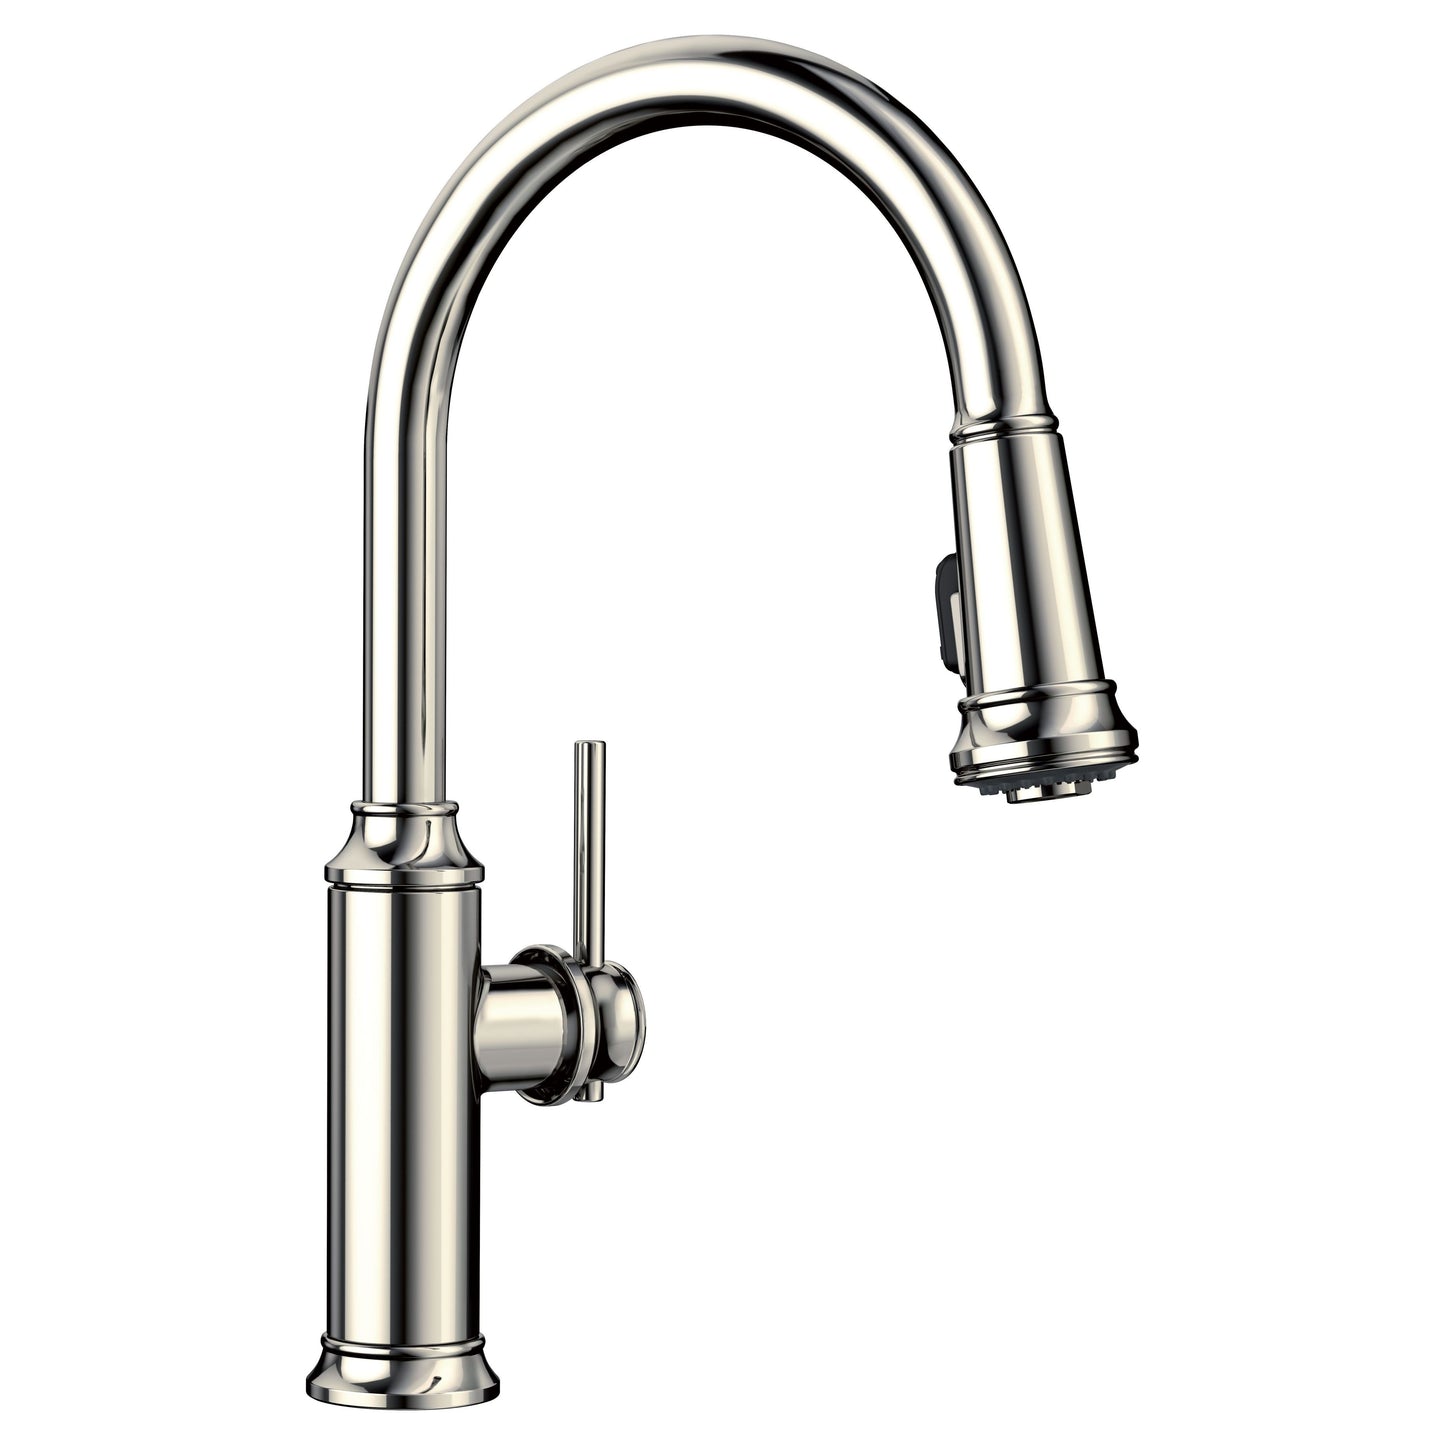 Blanco 442502 Empressa 1.5 GPM High Arc Pull-Down Dual Spray Kitchen Faucet in Polished Nickel